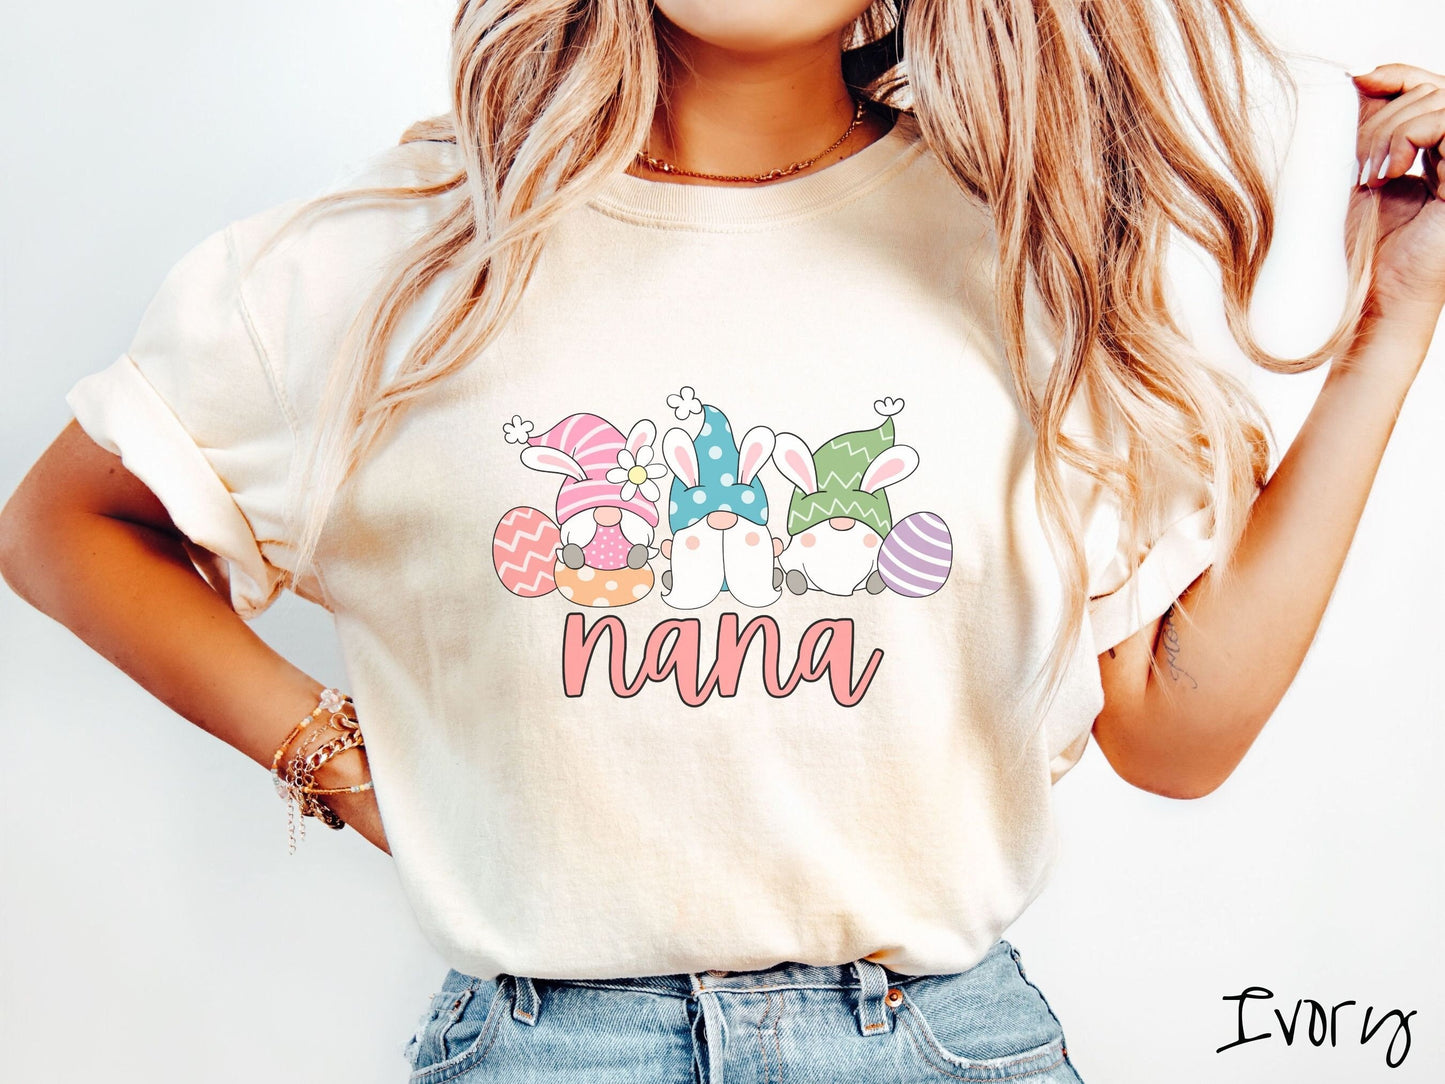 A woman wearing a cute, vintage ivory colored shirt with text Nana below three gnomes with rabbit ears sitting next to each other. The left one is wearing pink, the middle blue, and right in green, with colorful easter eggs scattered about.